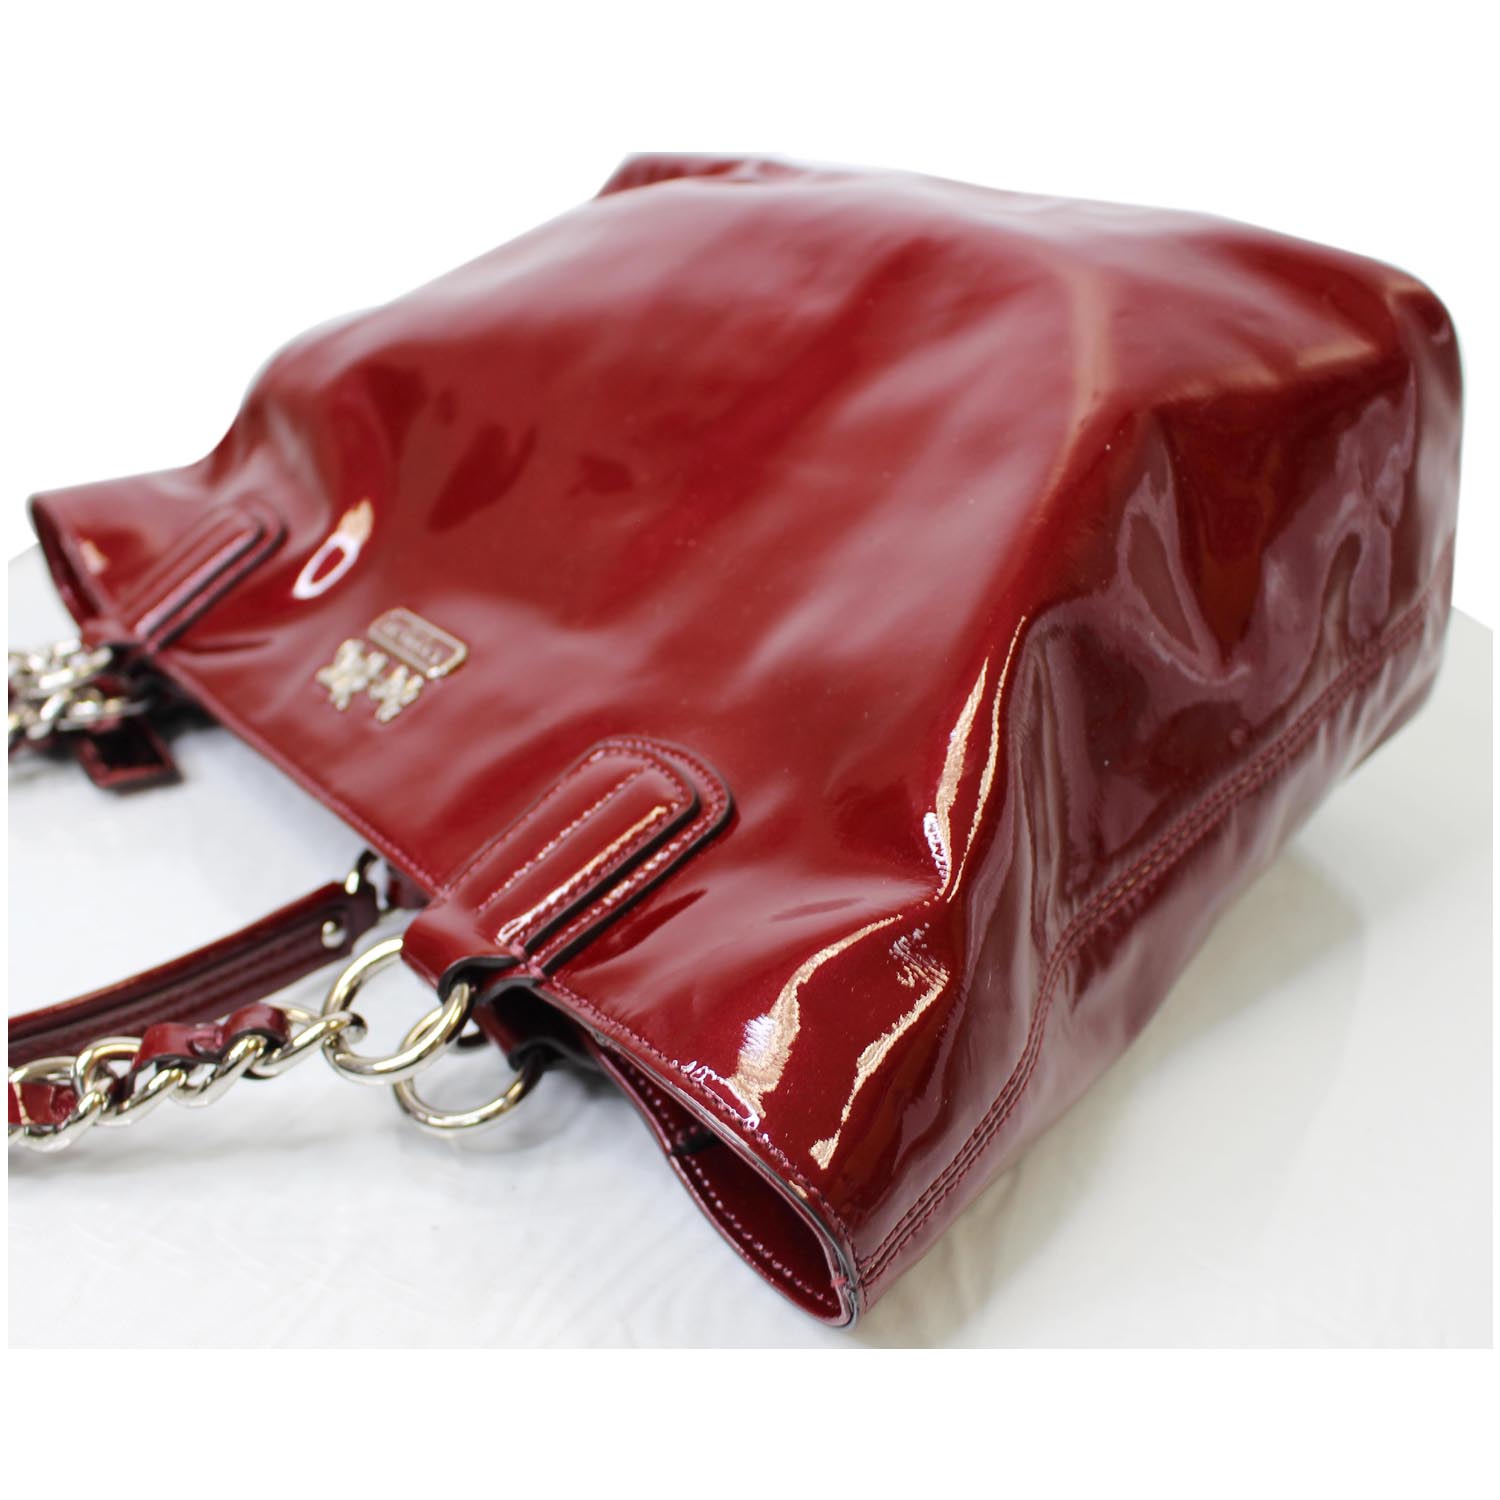 Emery Tote Red Patent Leather Tote Bag